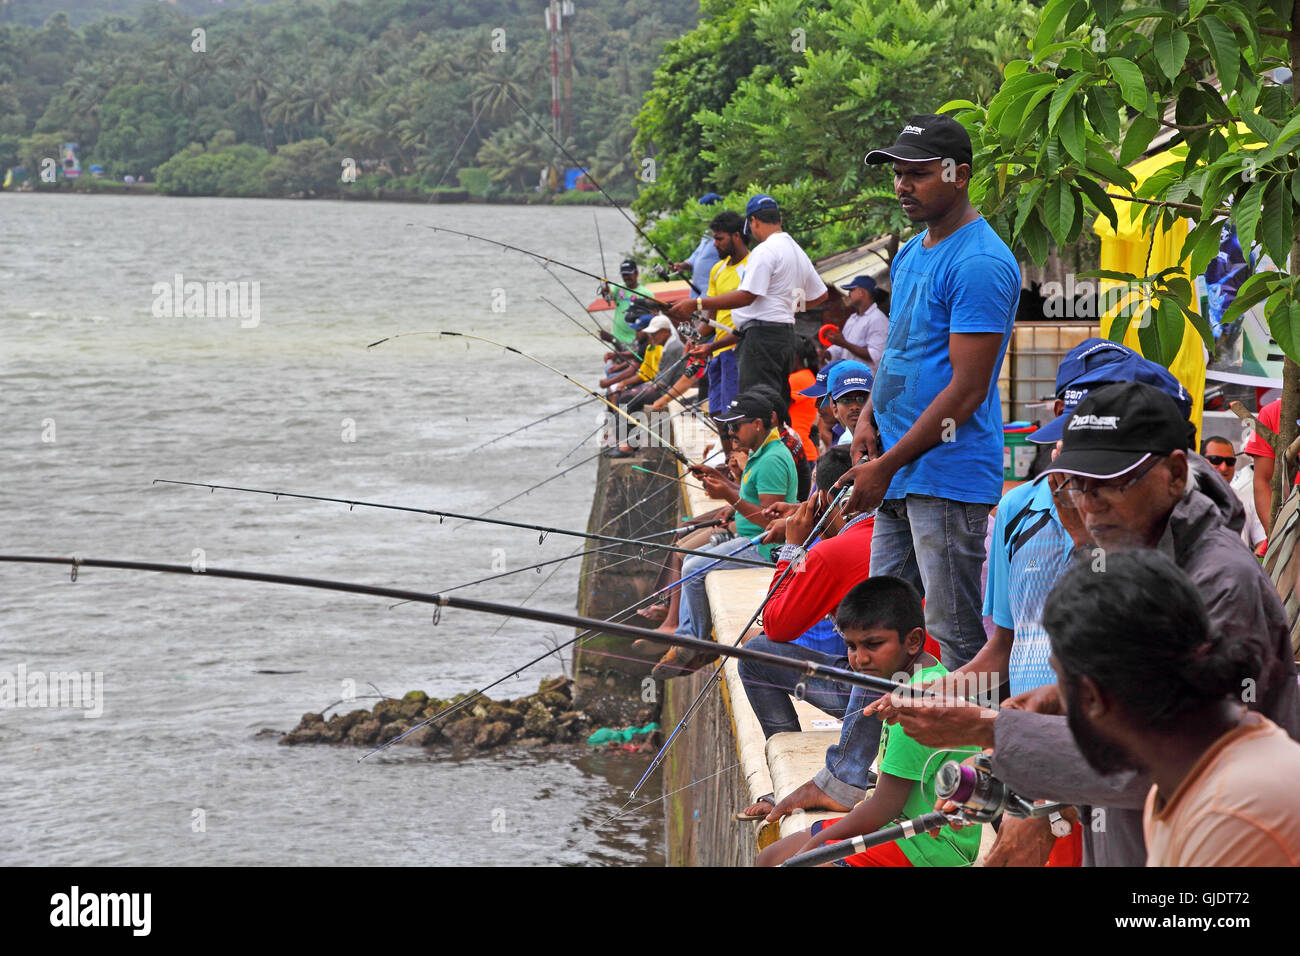 Goa, India. 15th Aug, 2016. Anglers participate in the 17th Annual All Goa Fishing Competition and Sea Food Festival at Ribandar in Goa, India. This is an annual event held on the banks of River Mondovi. MathewJoseK/Alamy Live News Stock Photo